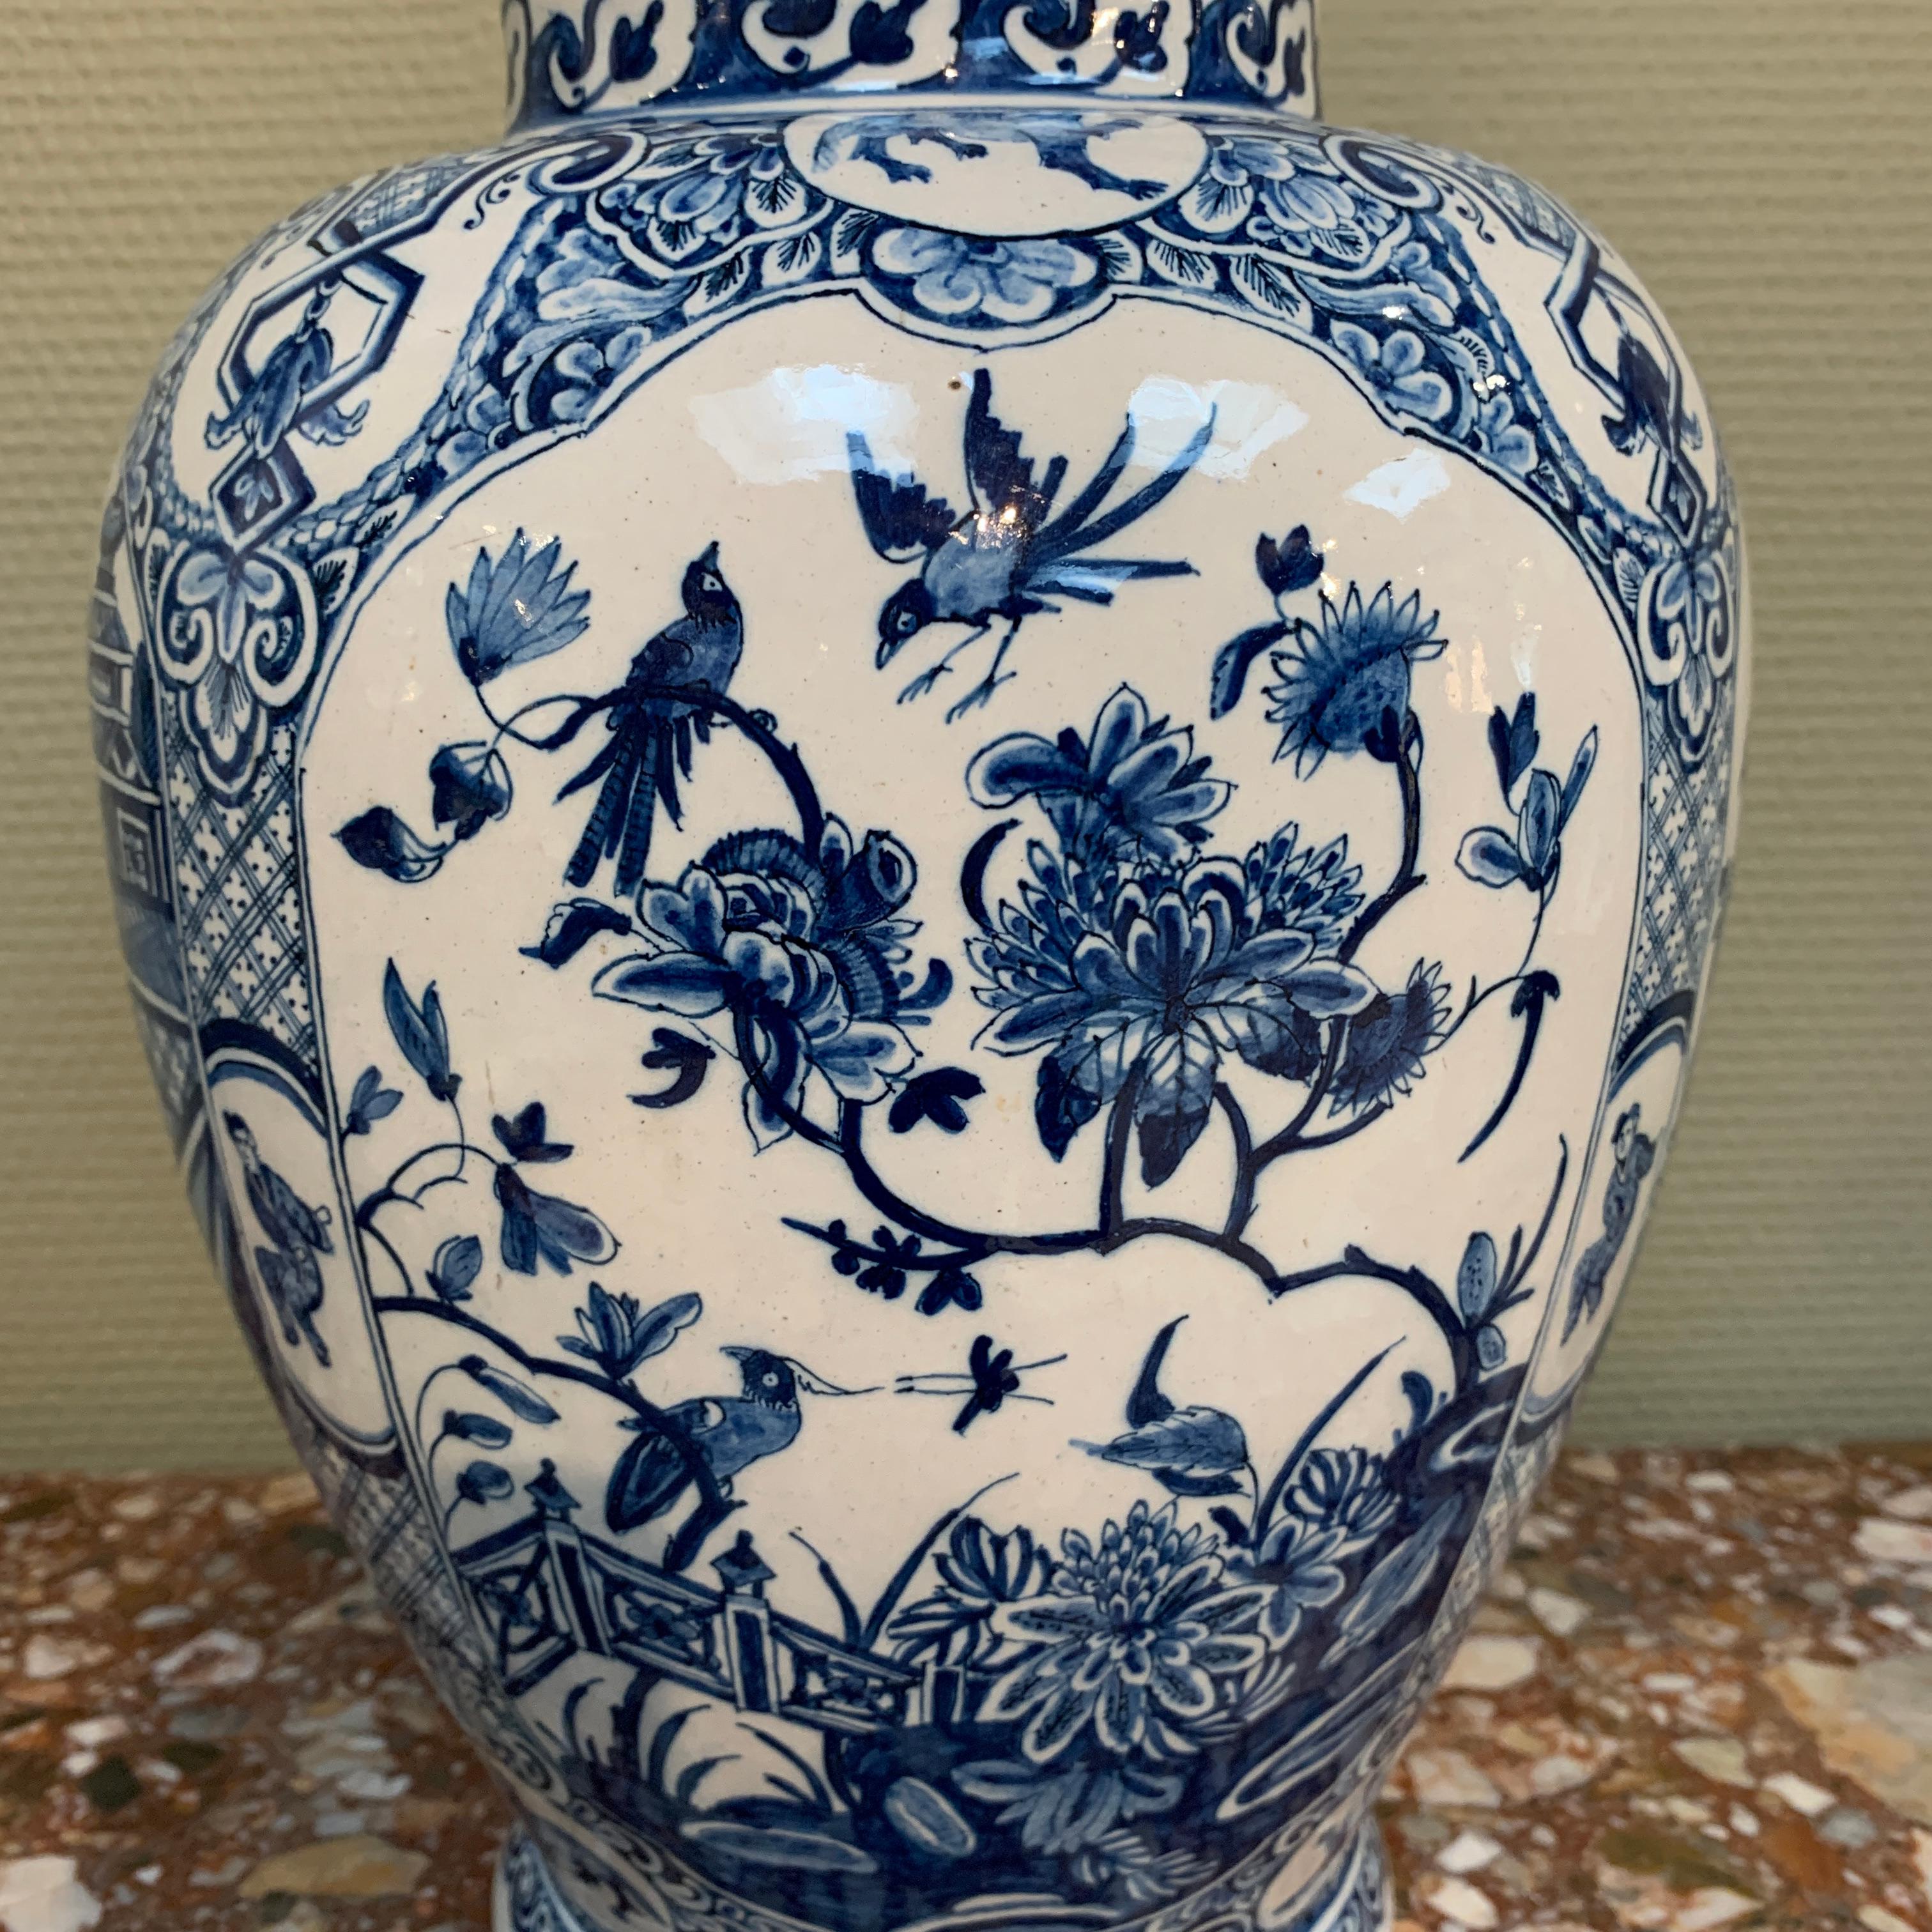 Large Dutch Delft Blue and White Chinoiserie Vase, Early 18th Century 2